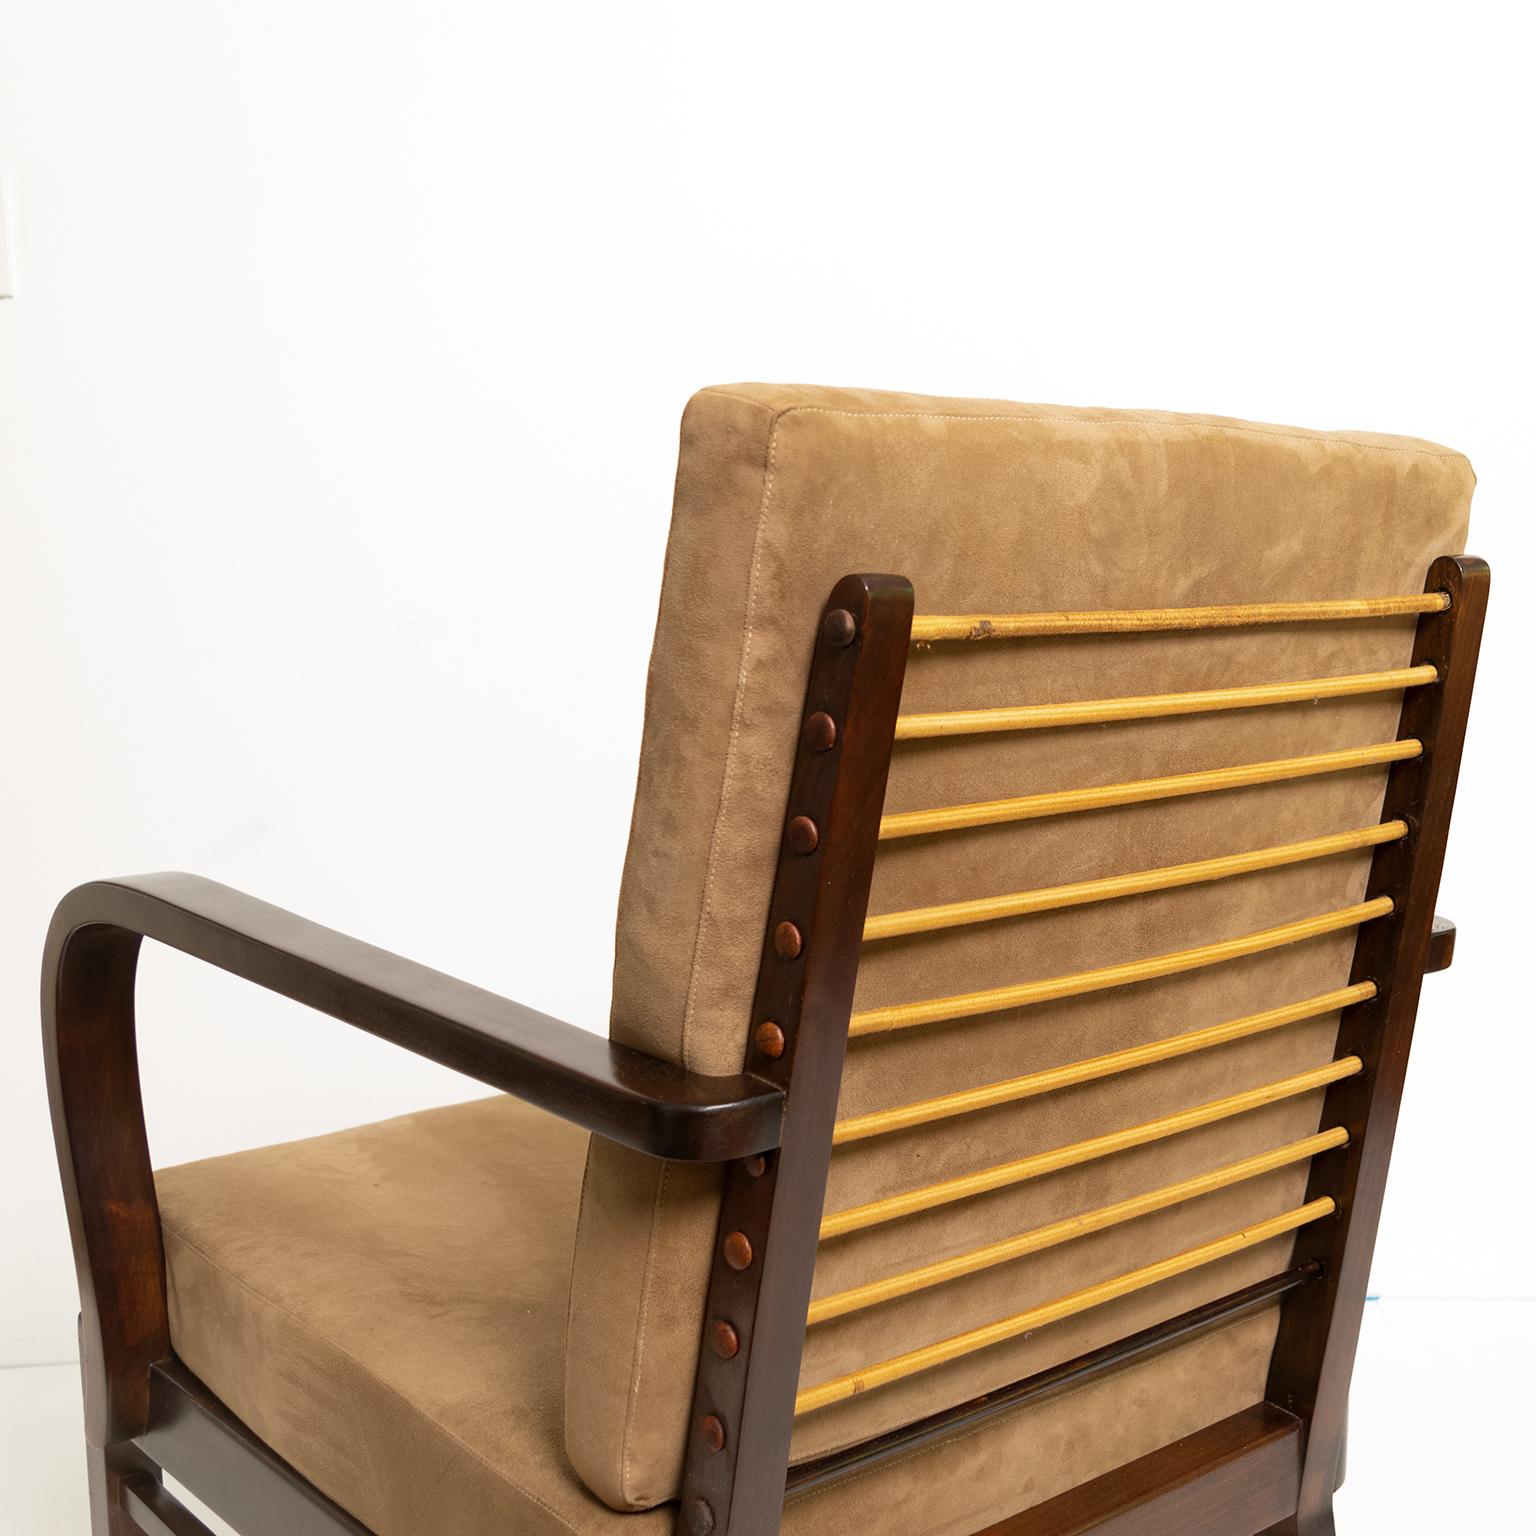 Suede Modernist 1920s Lounge Chair Designed by Wilhelm Knoll for Knoll Antimott